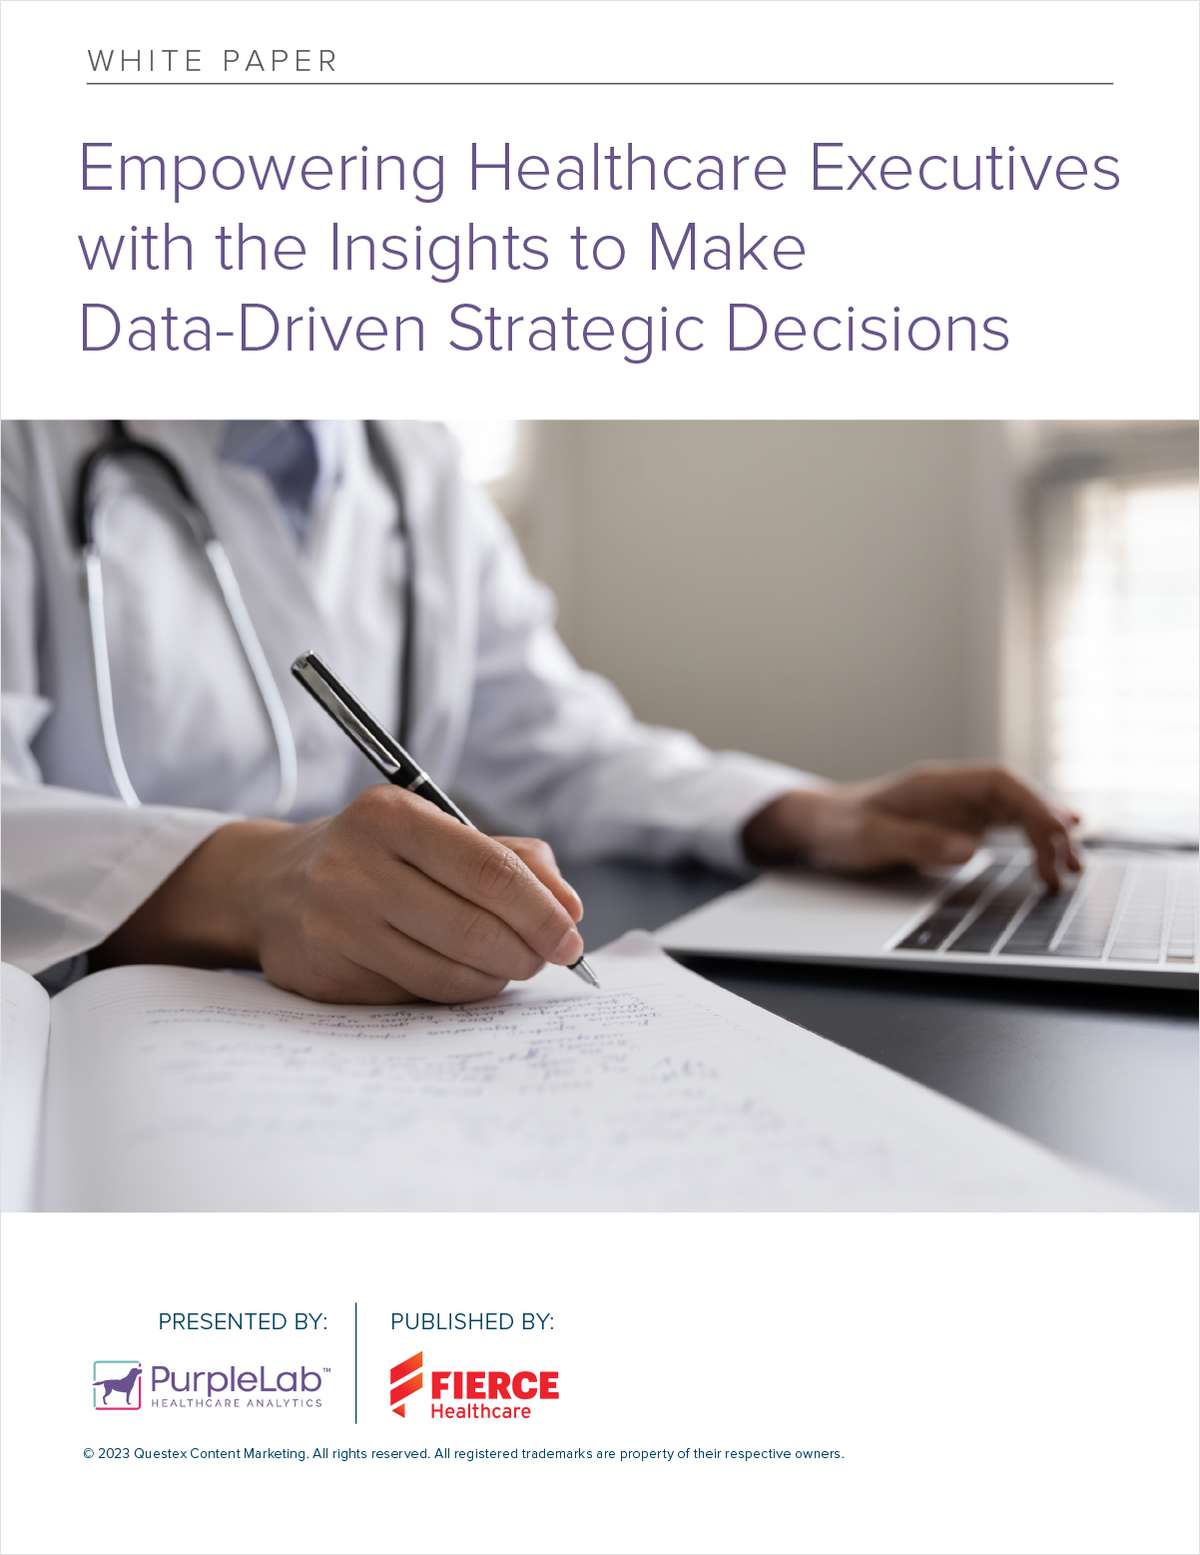 Empowering Healthcare Executives with the Insights to Make Data-Driven Strategic Decisions